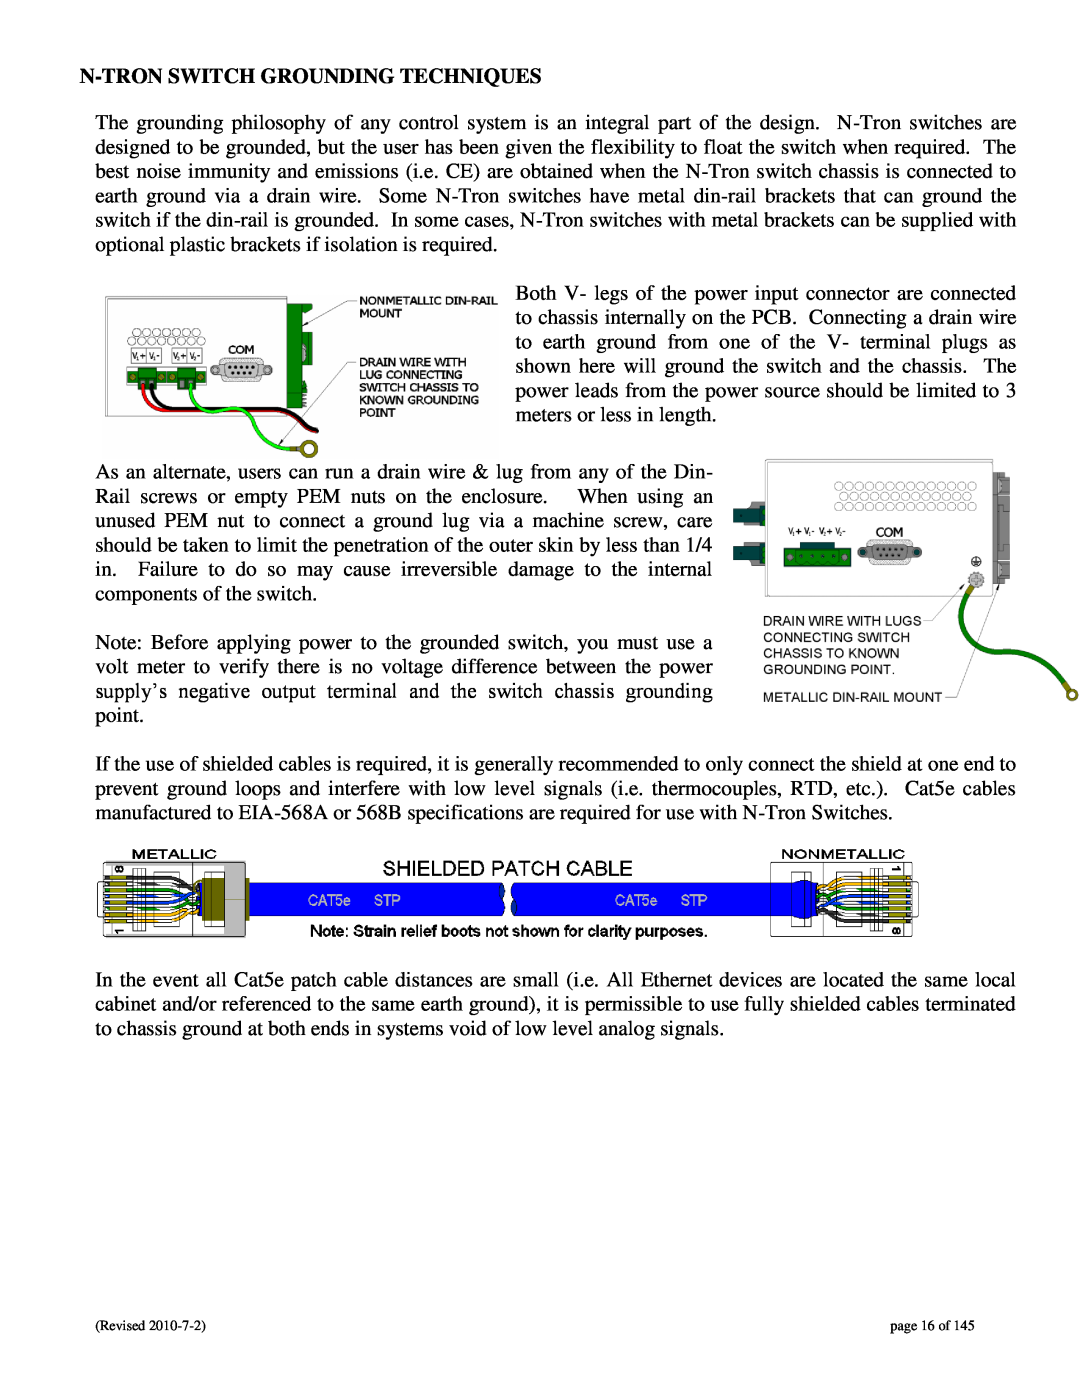 N-Tron 9000 user manual N-Tron Switch Grounding Techniques, page 16 of 